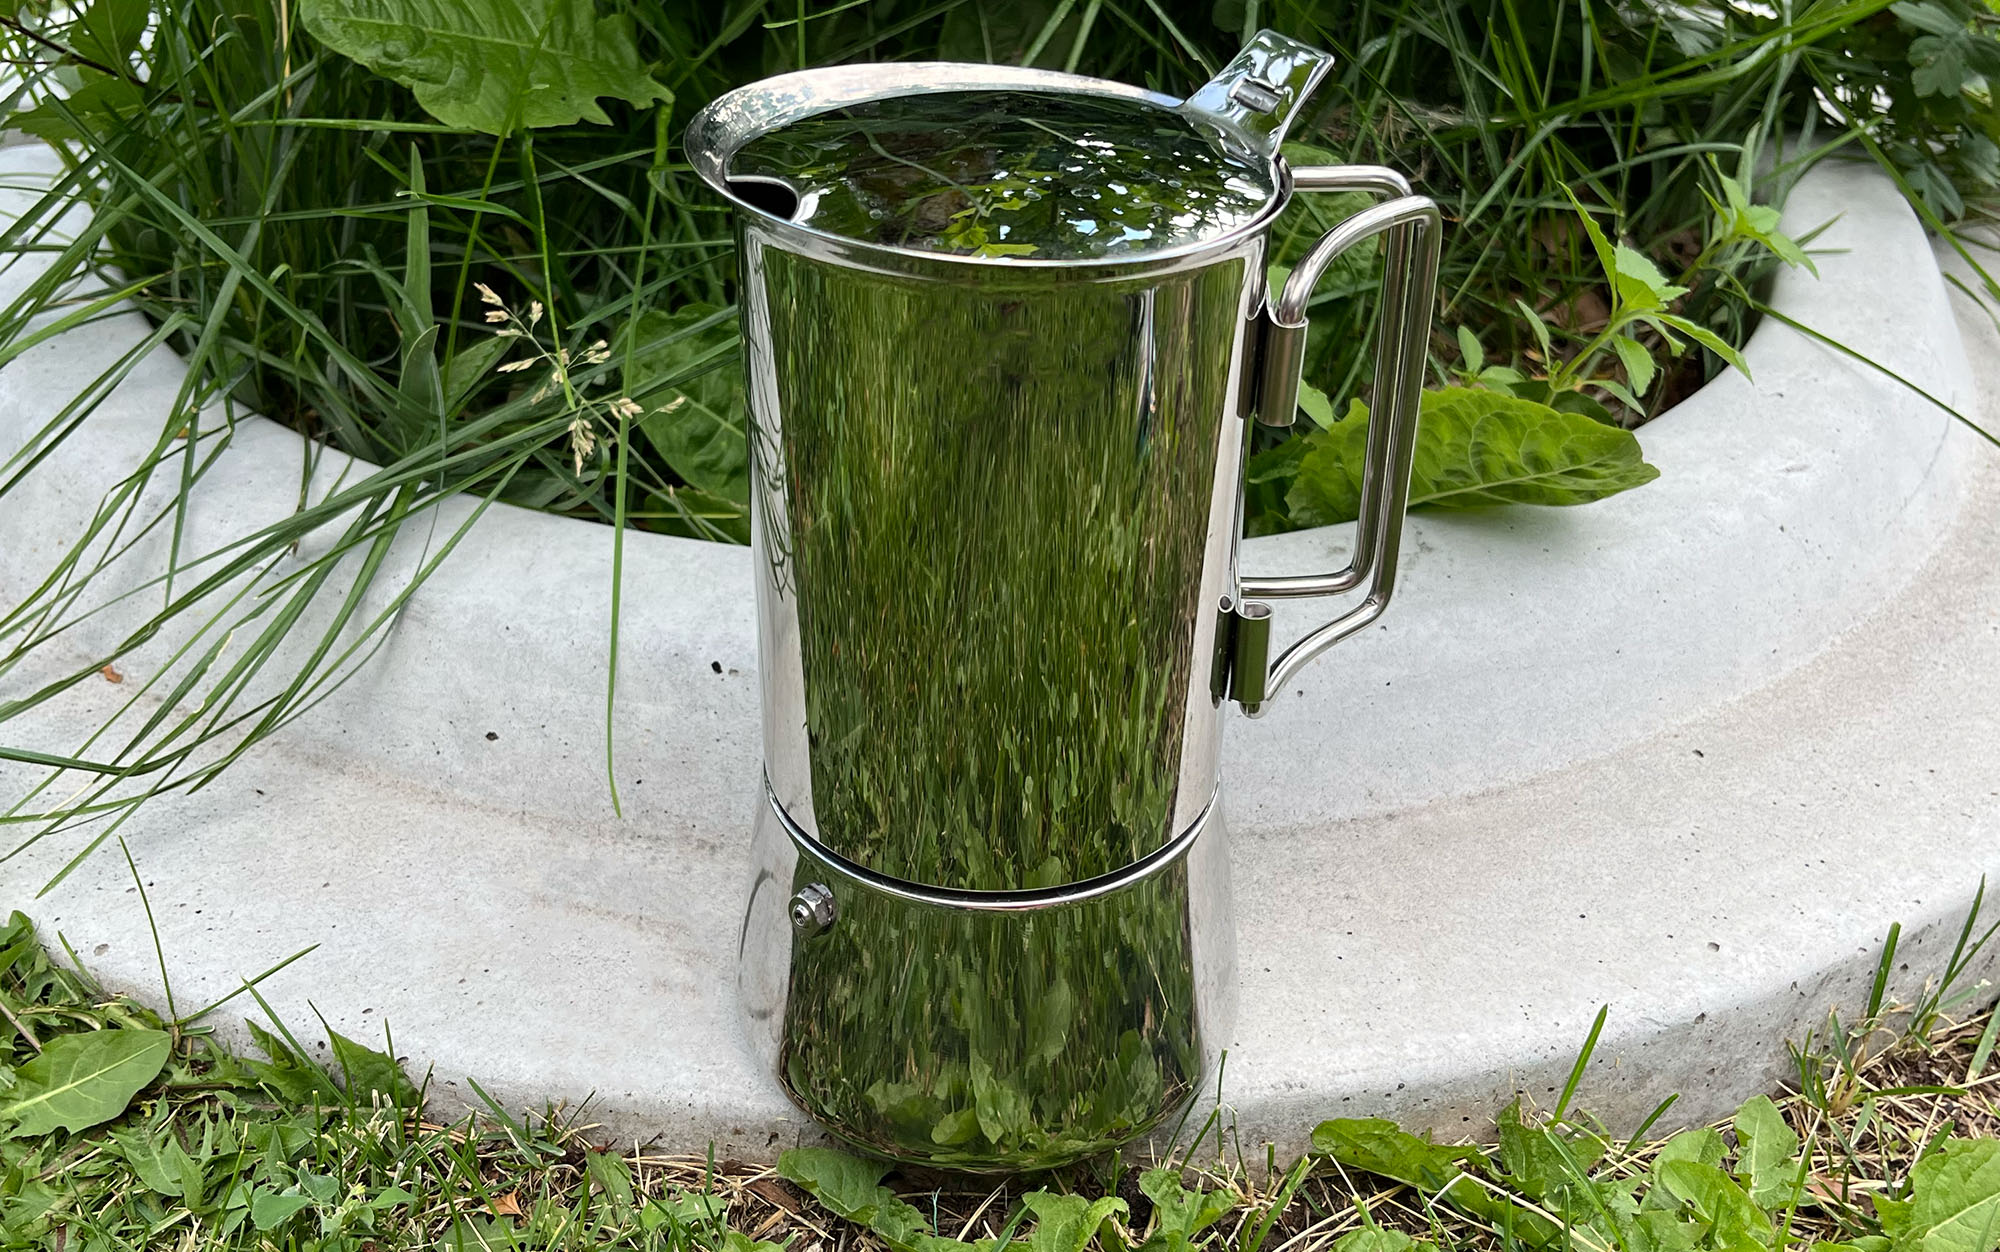 The GSI Outdoors Moka Pot is one of the best camping coffee makers.